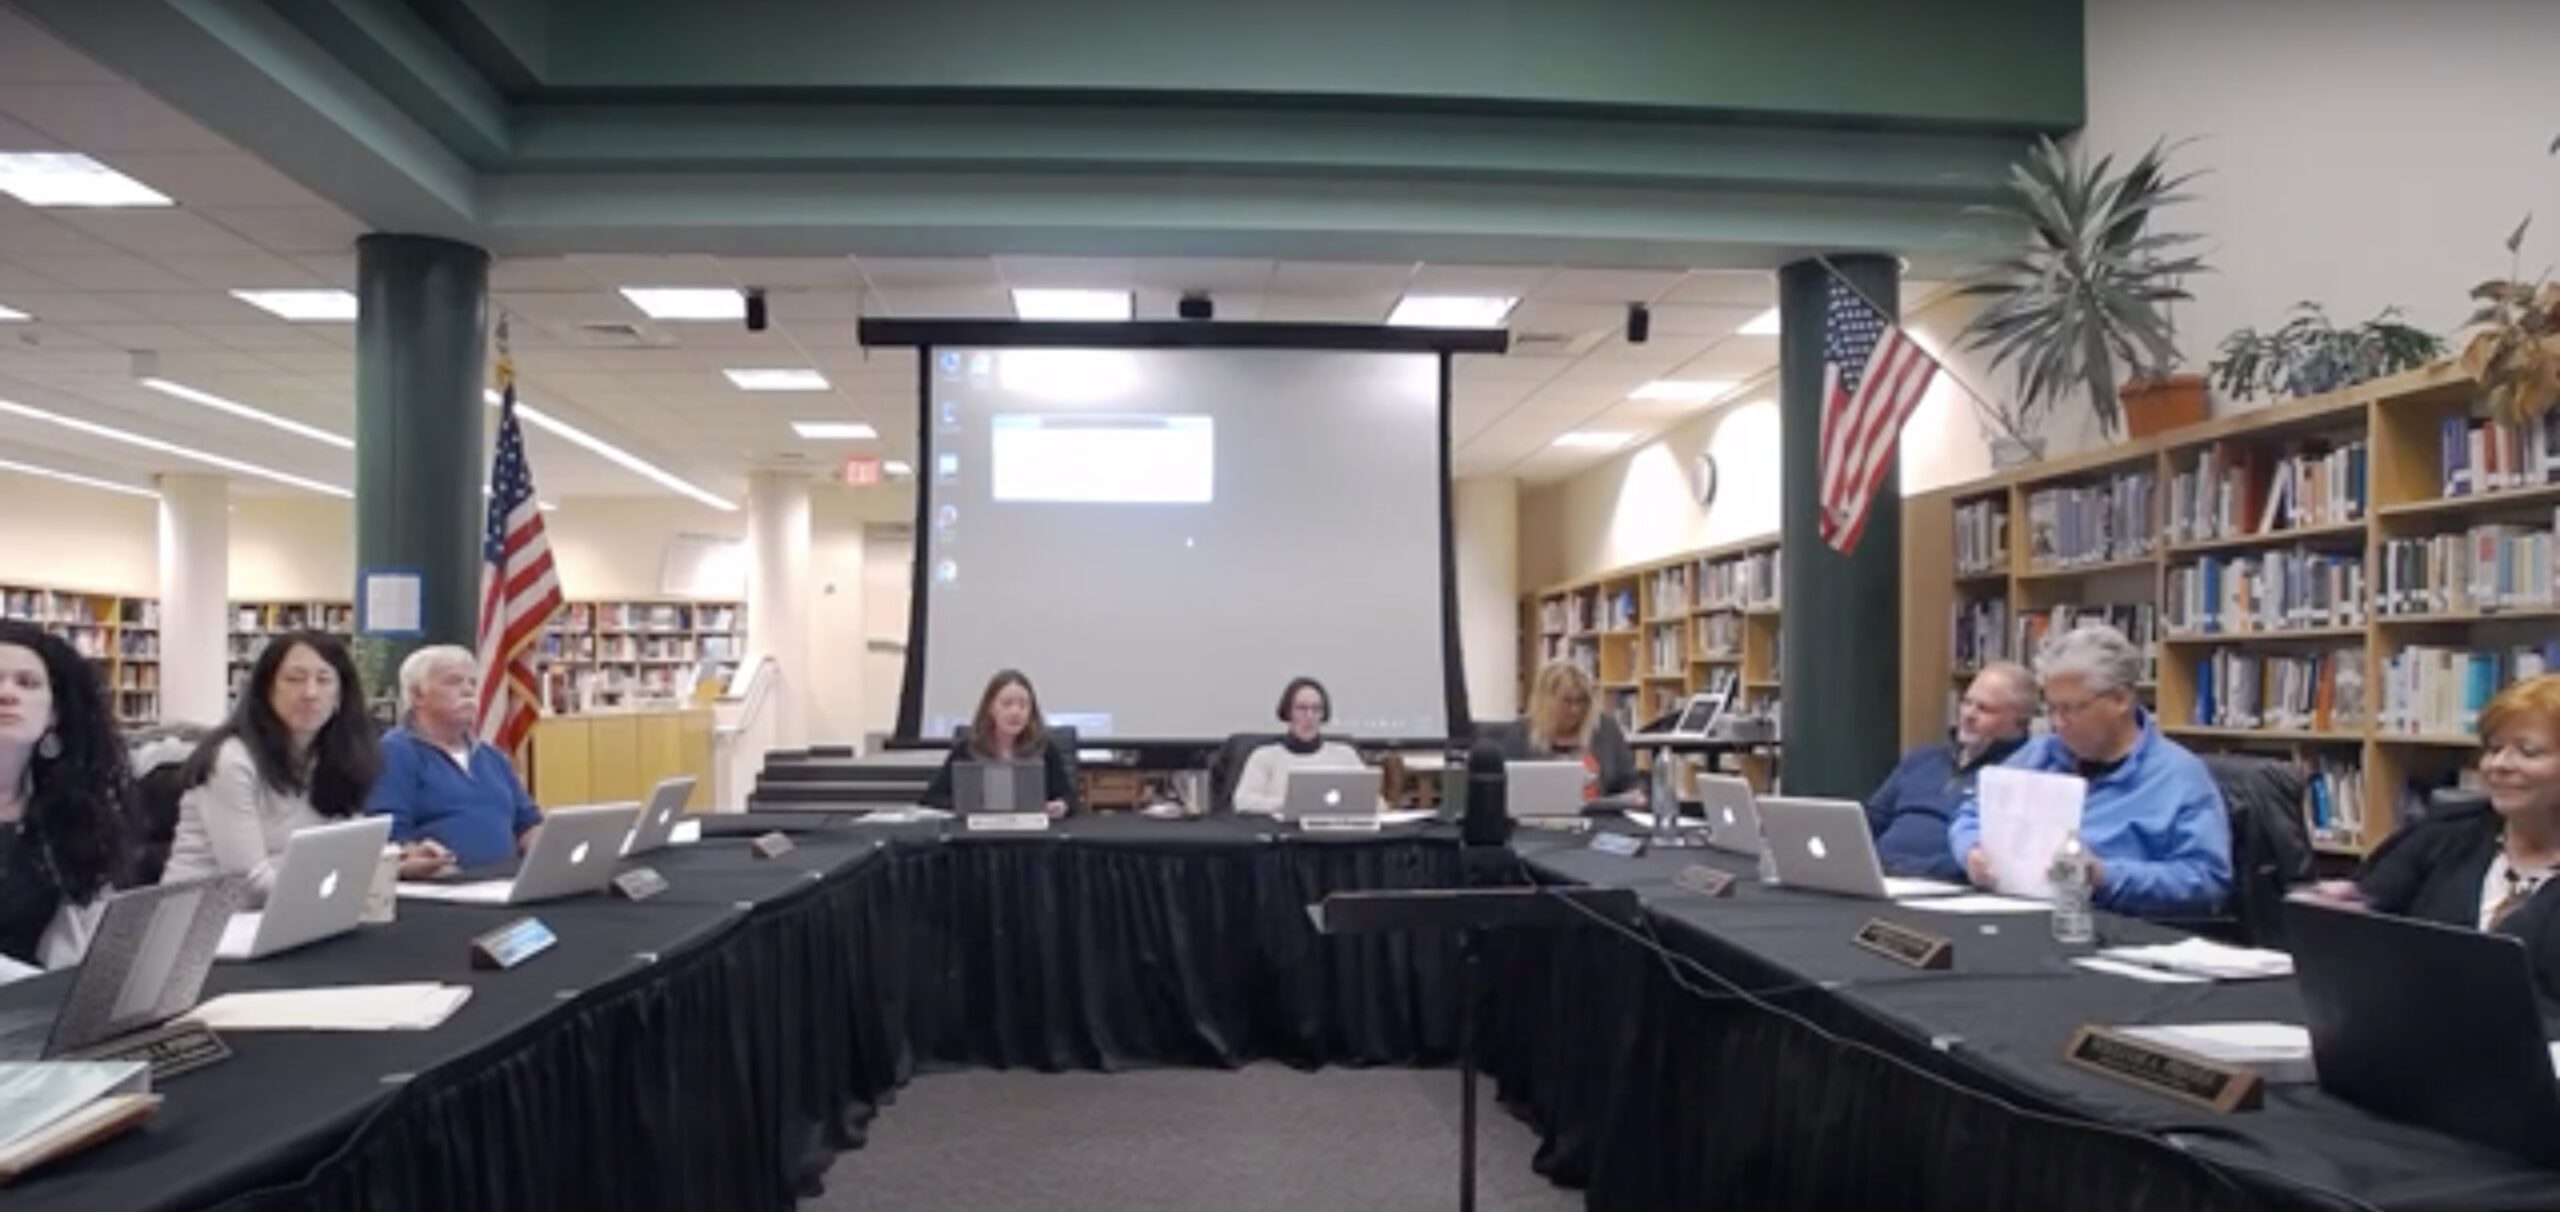 Westhampton Beach's board of education listens to district principals present their projected 2023-24 school year budgets during the February 6 meeting.